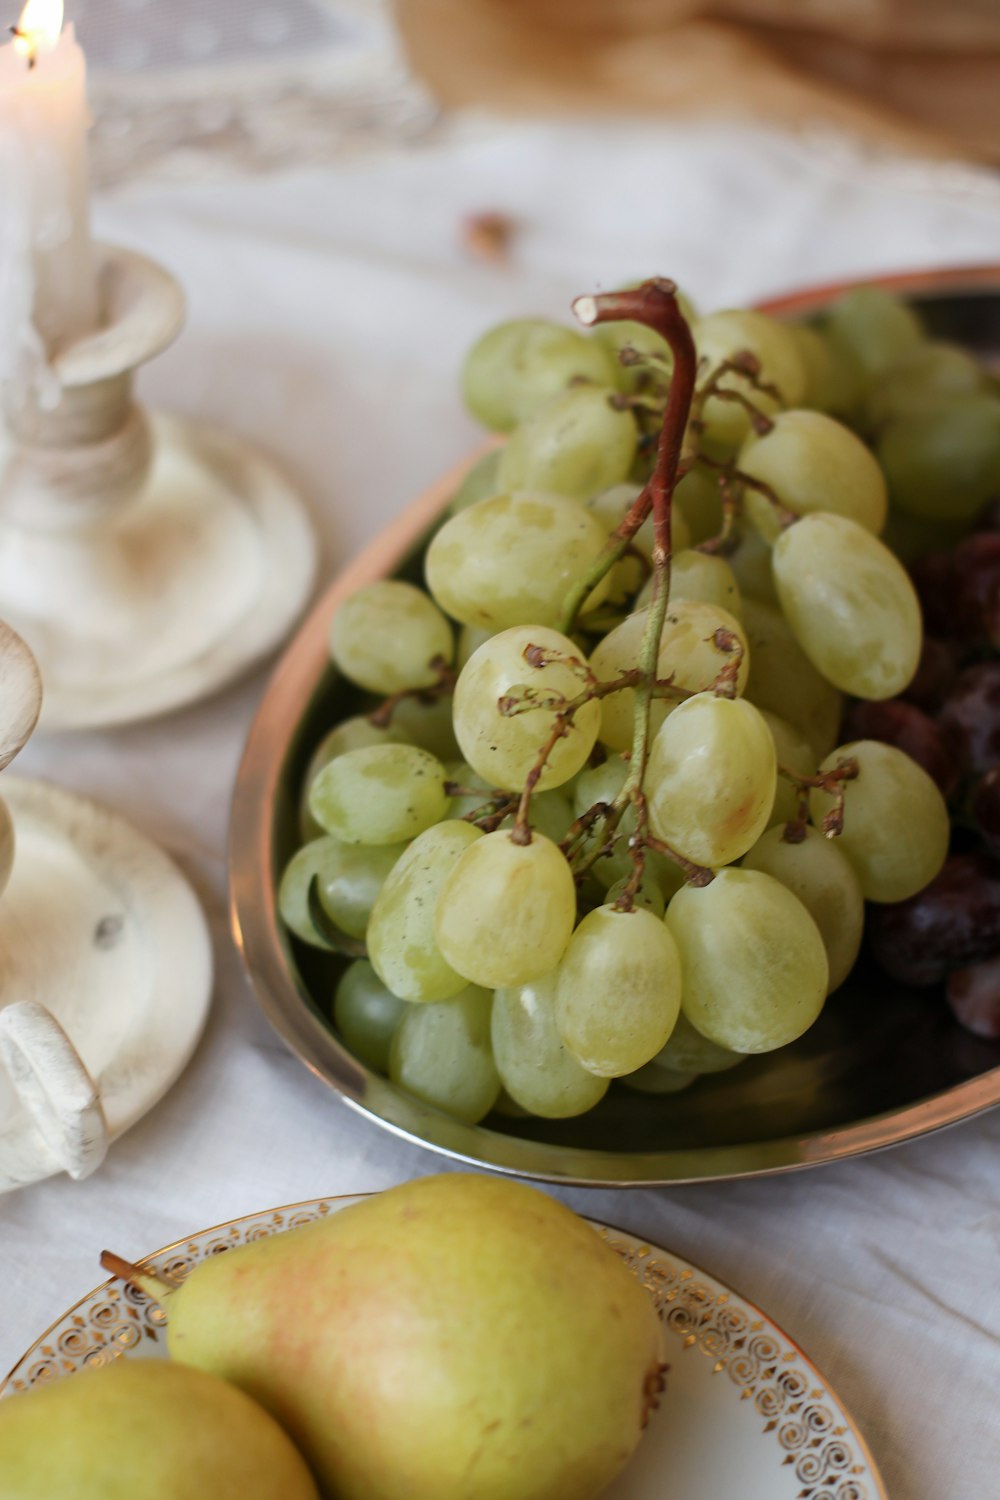 a plate of grapes and pears on a table